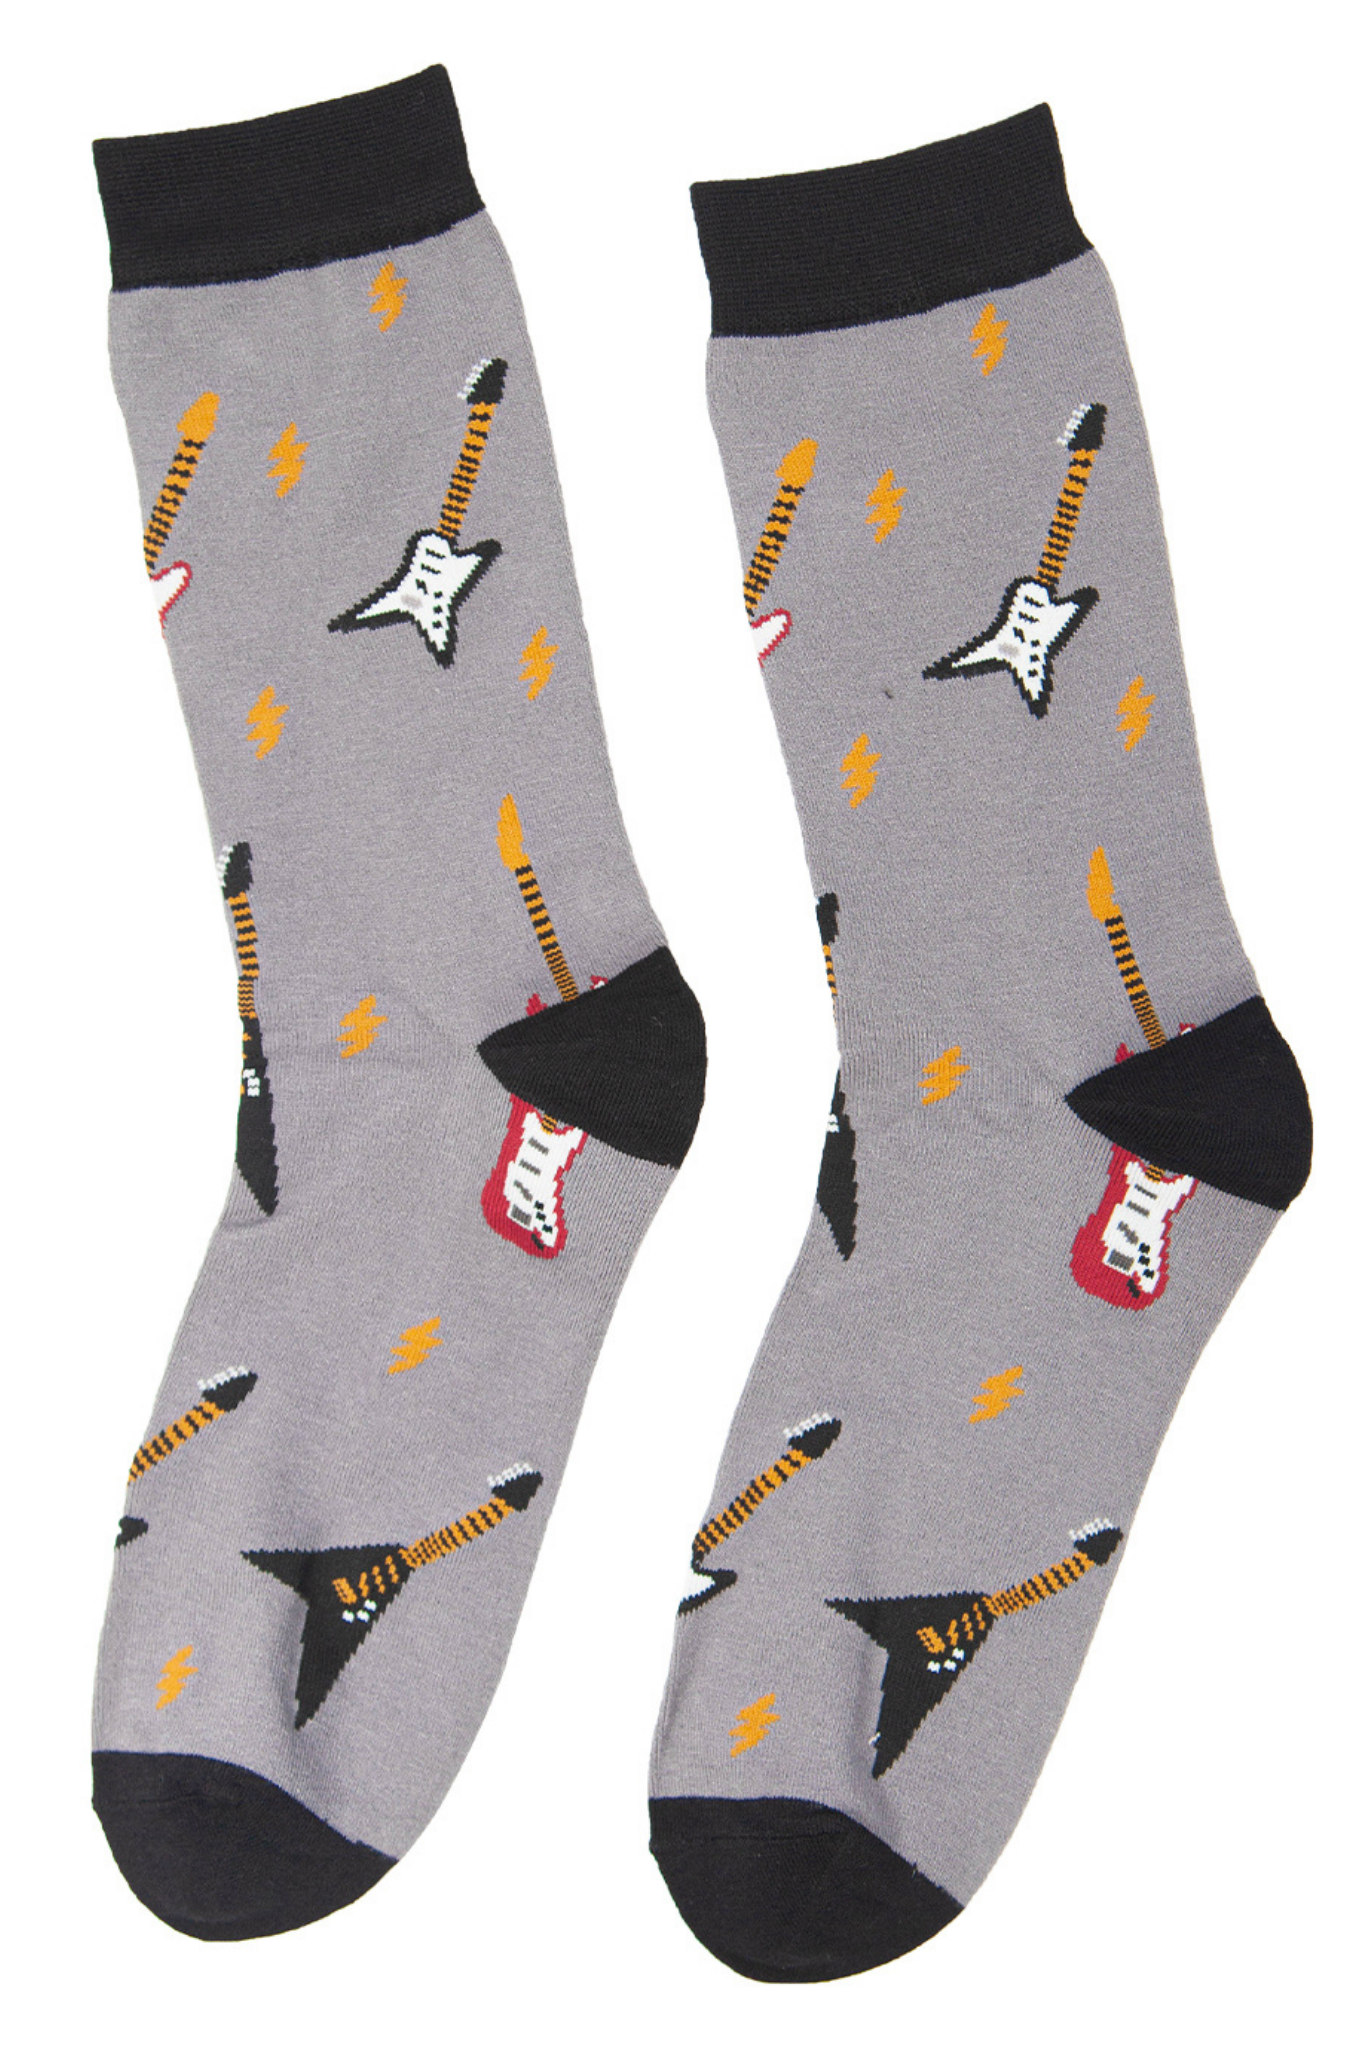 grey dress socks with an electic guitar pattern